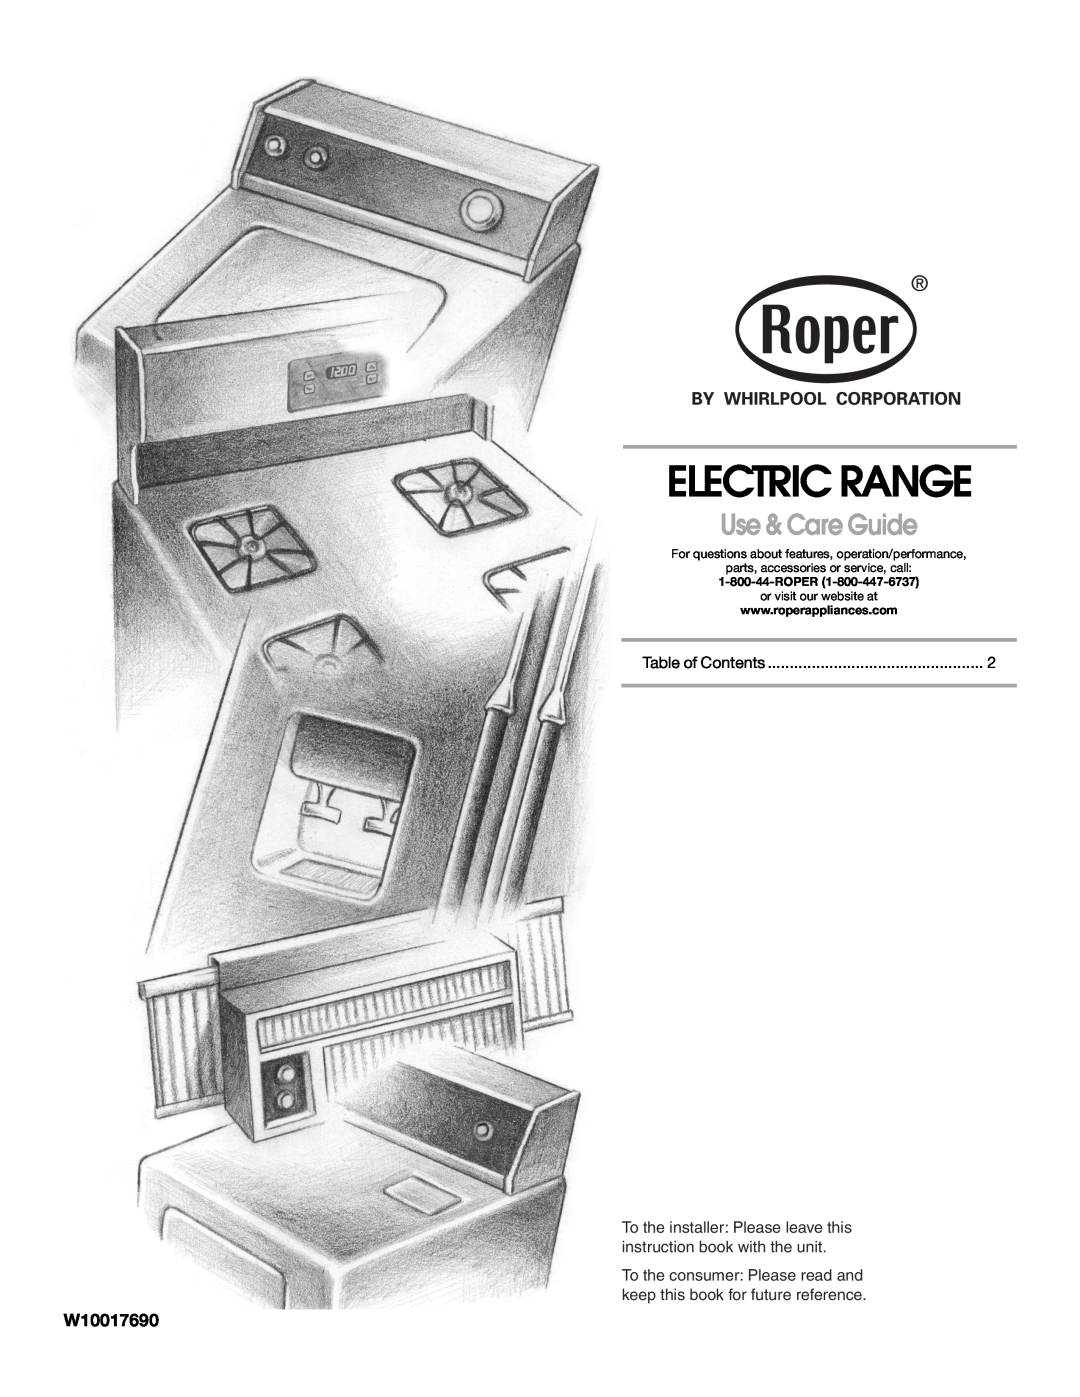 Roper W10017690 manual Electric Range, Use & Care Guide, parts, accessories or service, call, Roper 